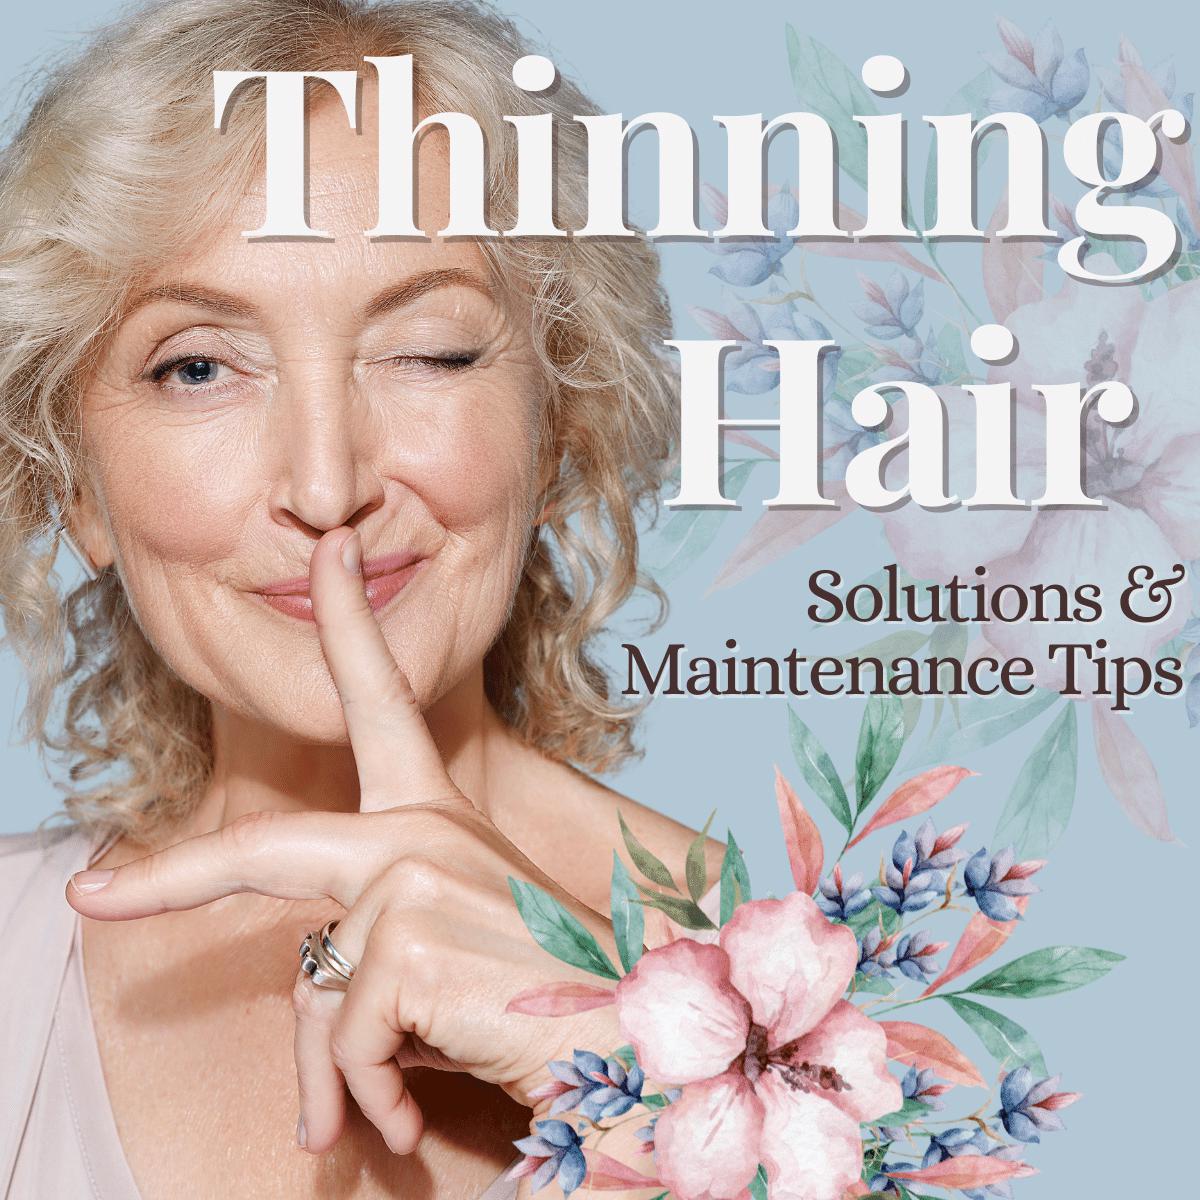 Thinning Hair - Solutions & Maintenance Tips